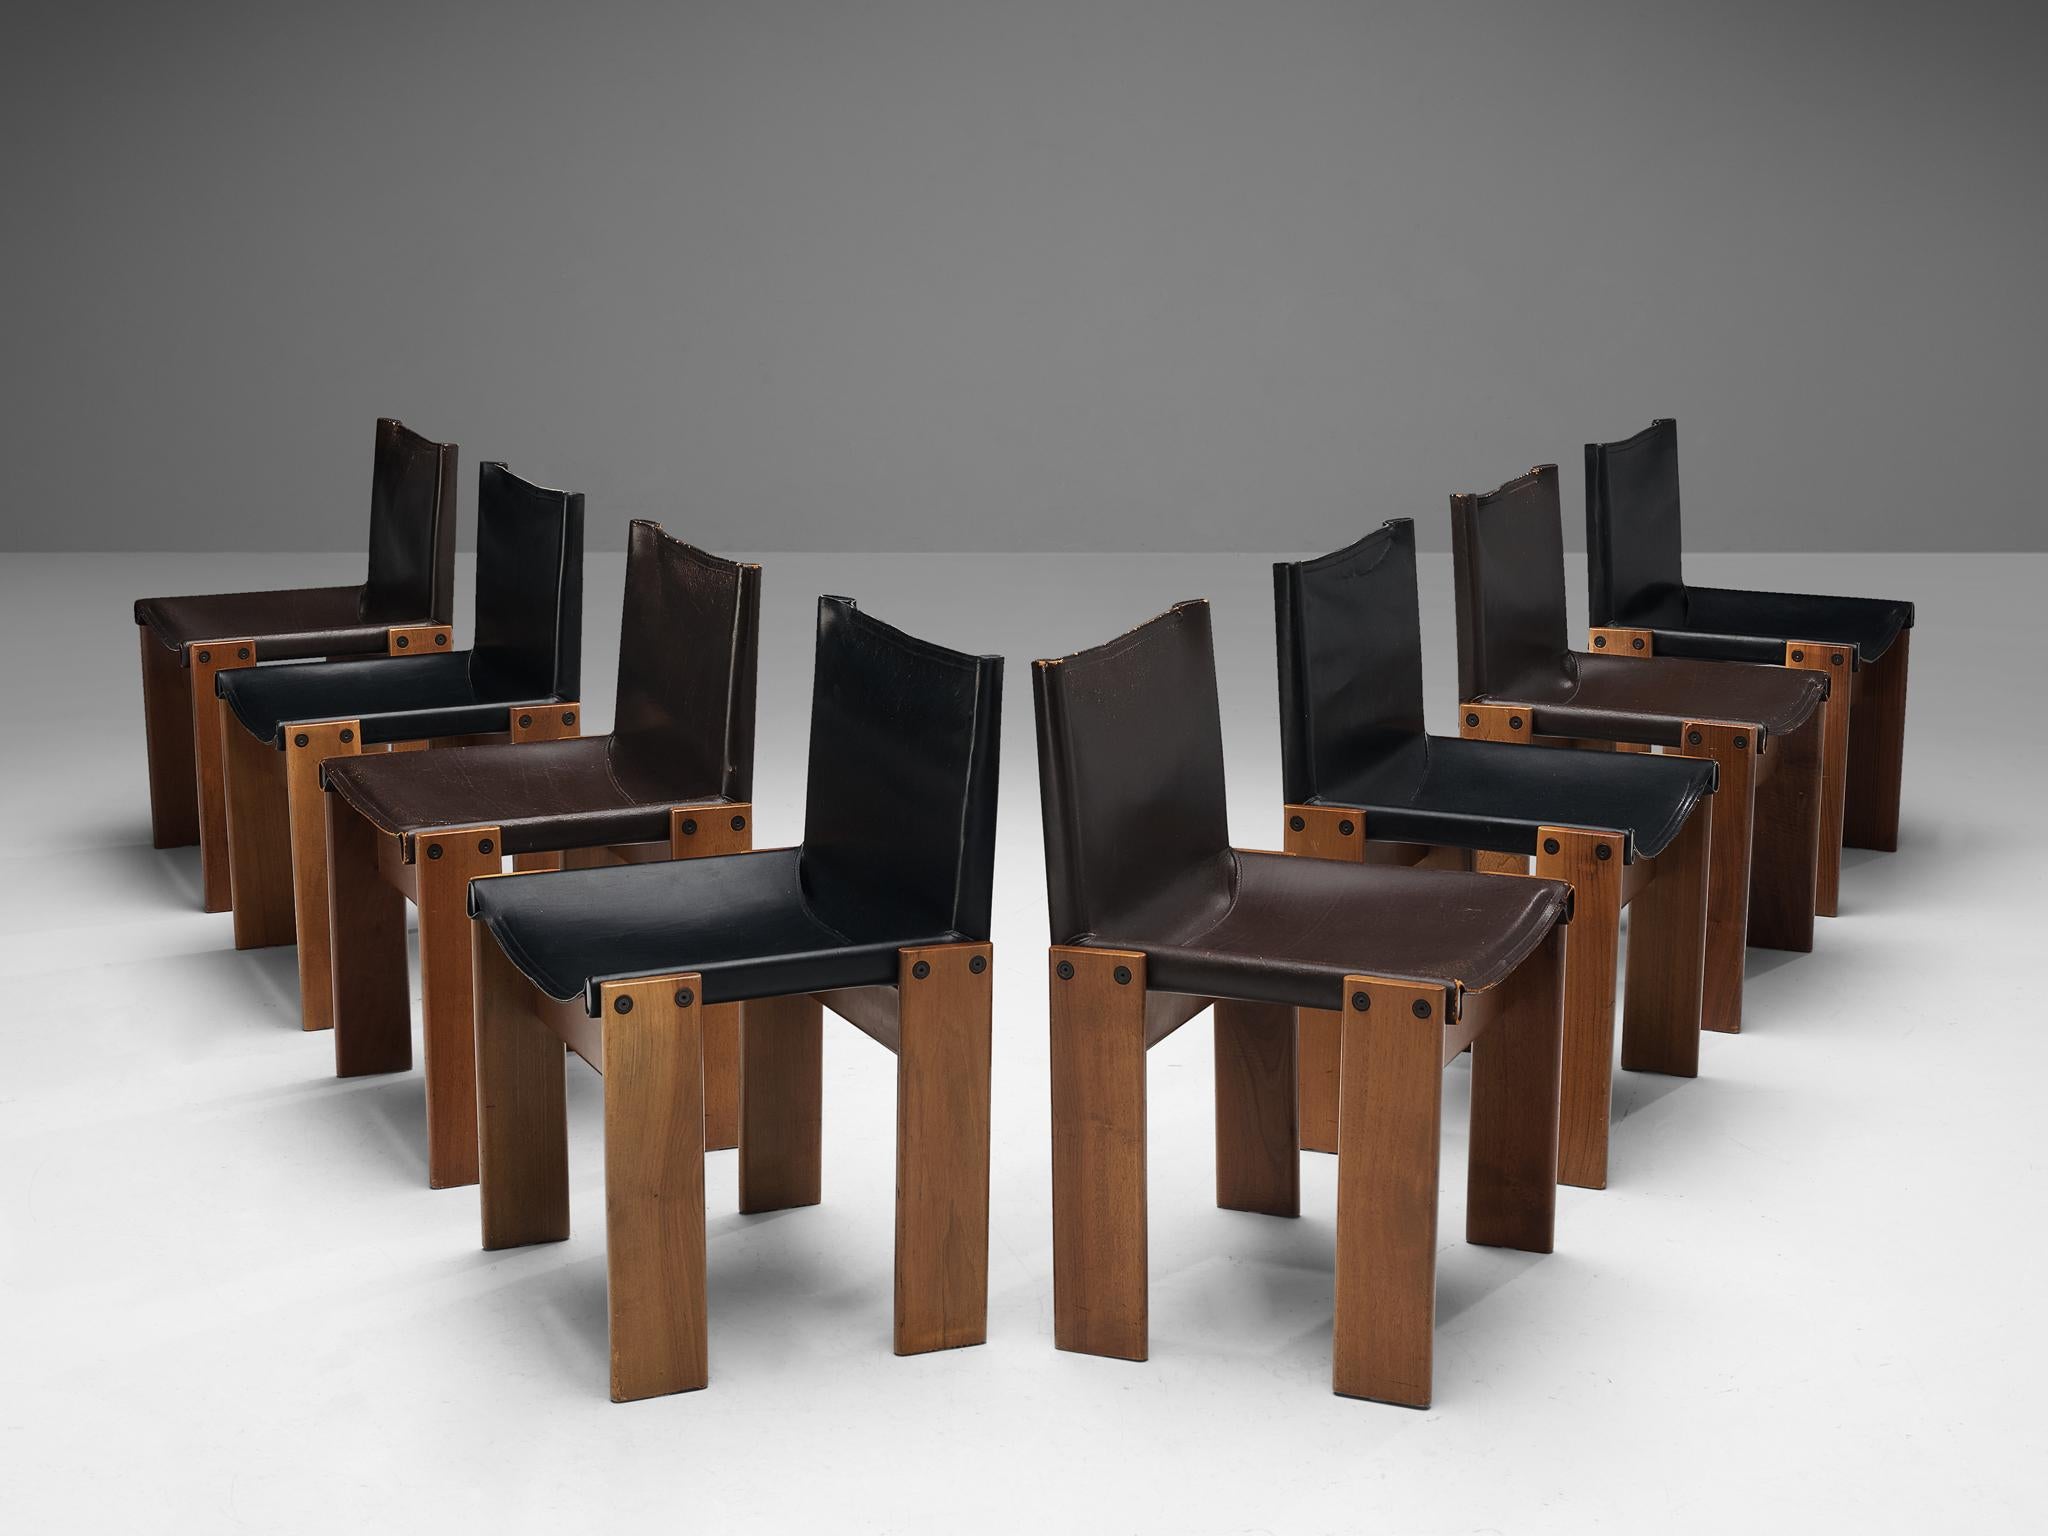 Afra & Tobia Scarpa for Molteni, dining chairs, model 'Monk', patinated walnut, black and brown leather, Italy, 1974 

The wonderfully deep black and brown leather forms a striking combination with the blond walnut. Interesting is the 'flat' shape